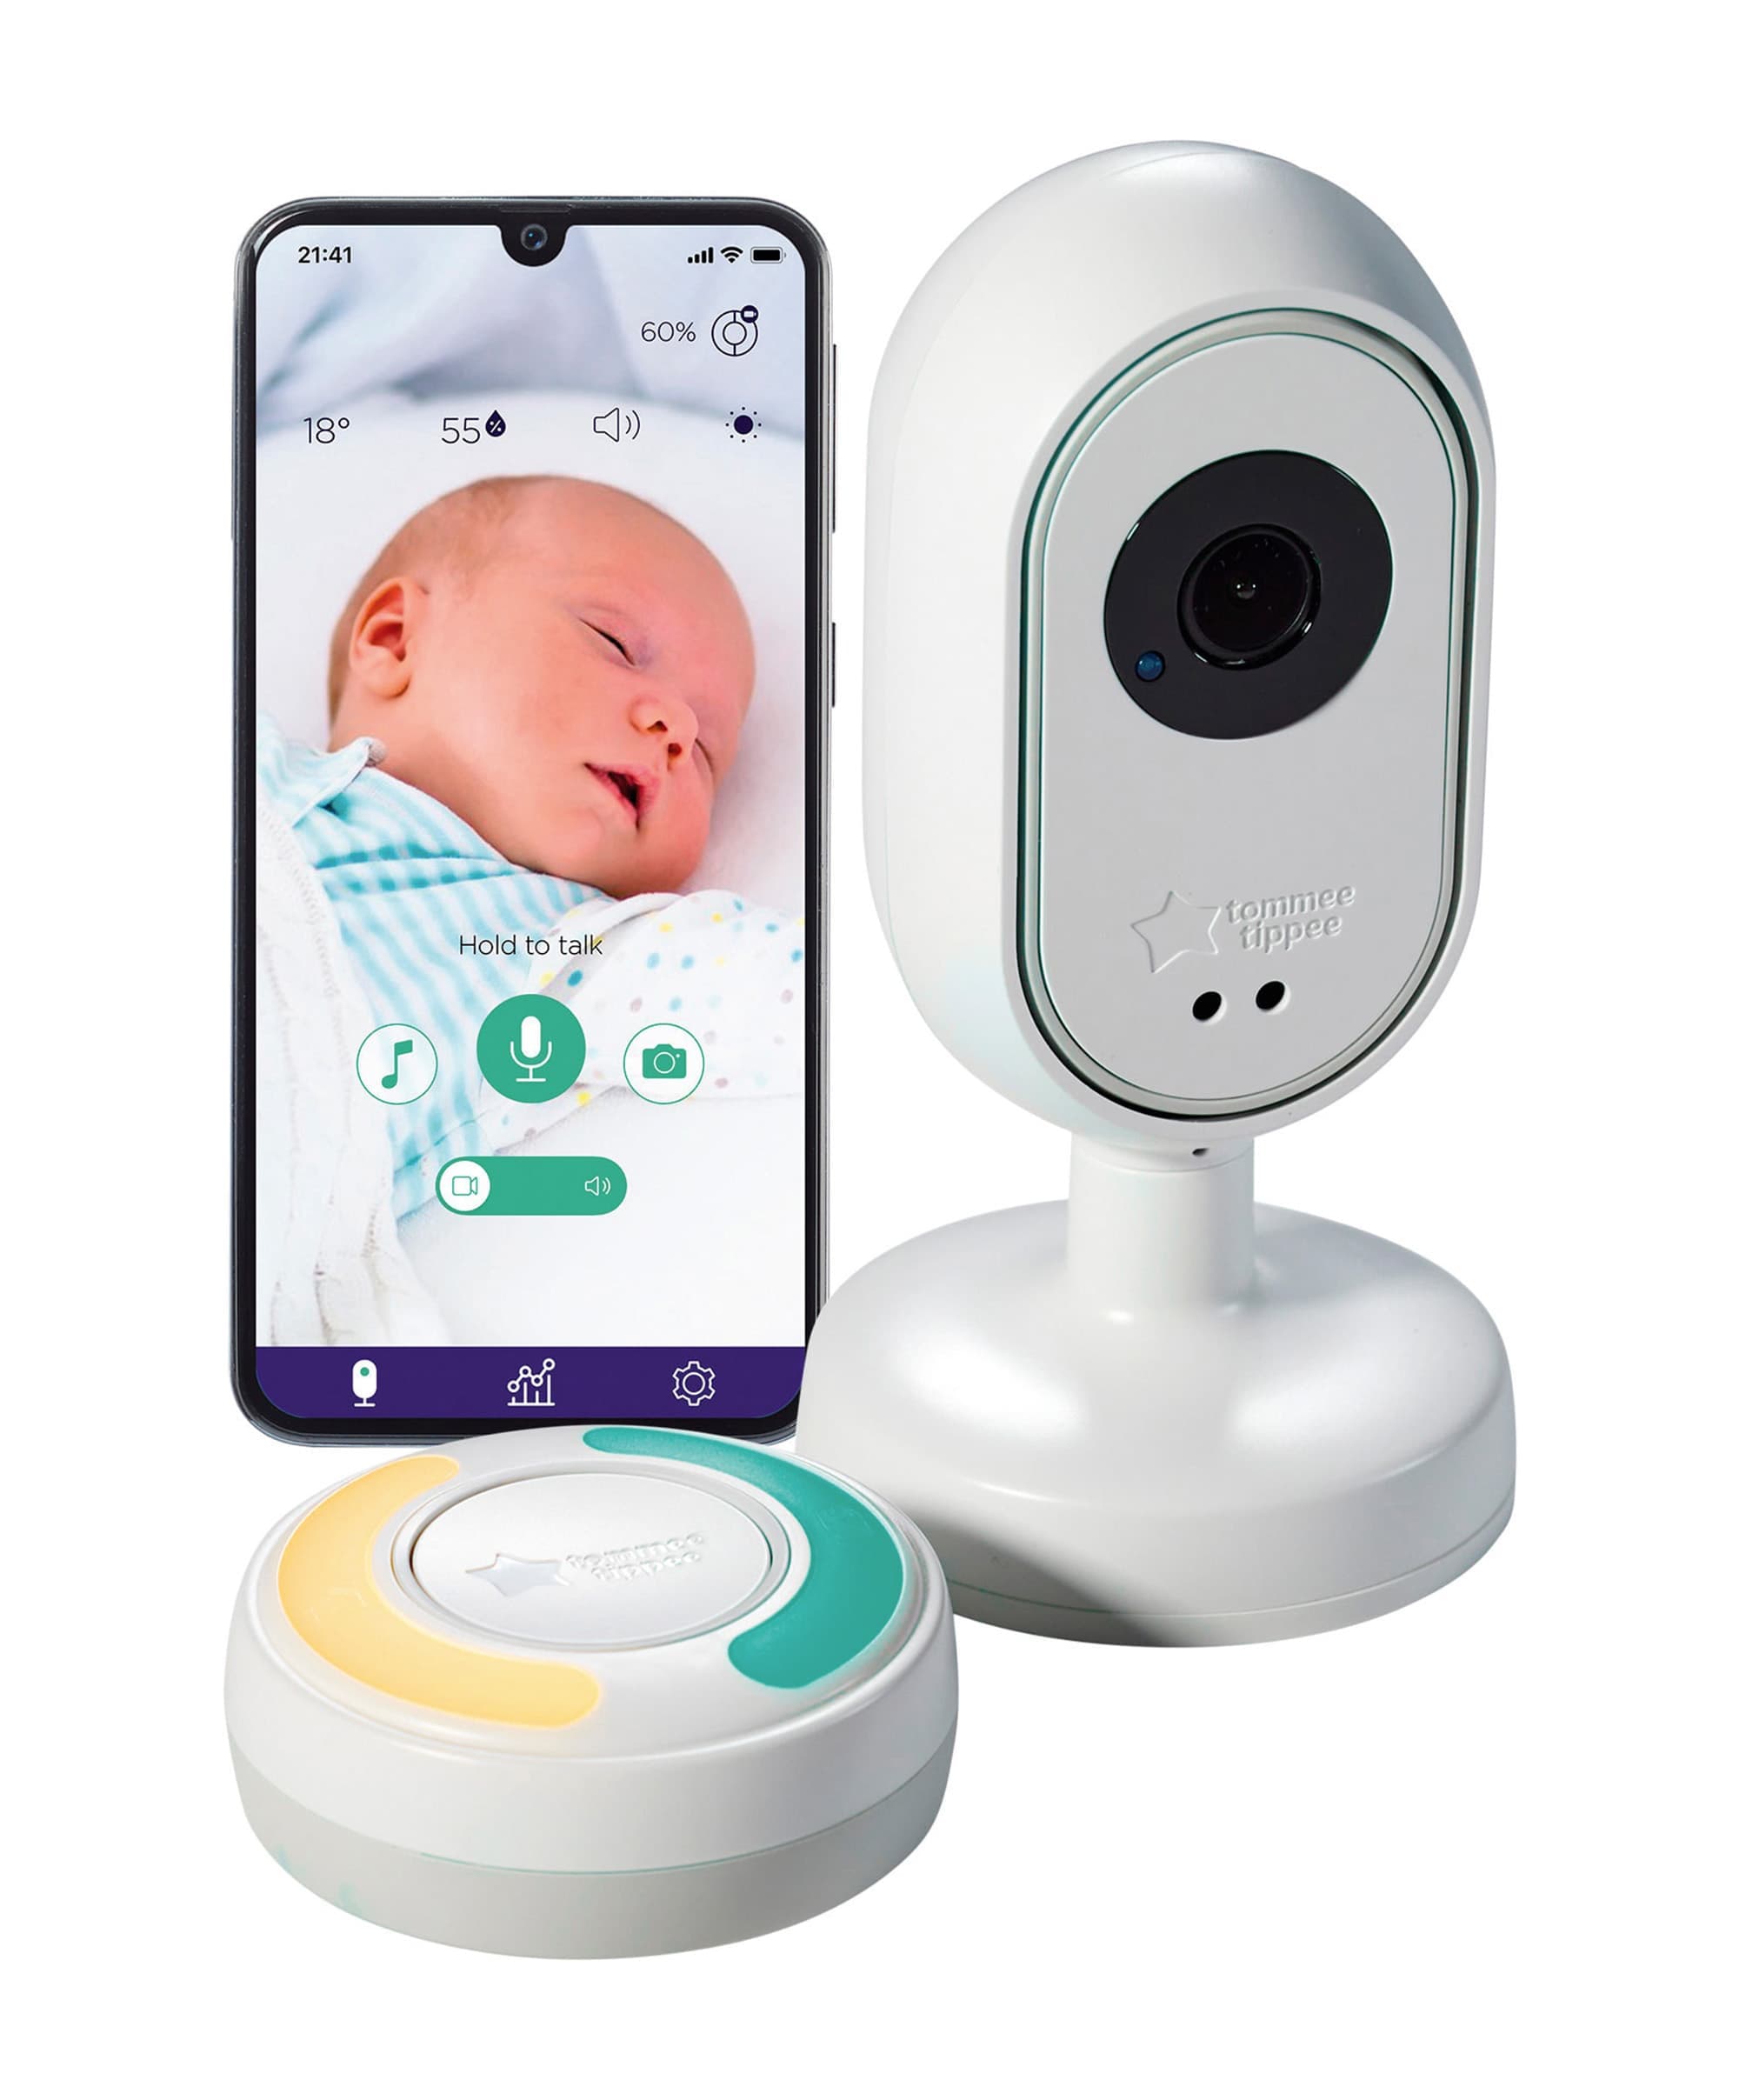 Check out our new MomCozy baby monitor!! ♡☁️👶🏽 it's non Wi-Fi